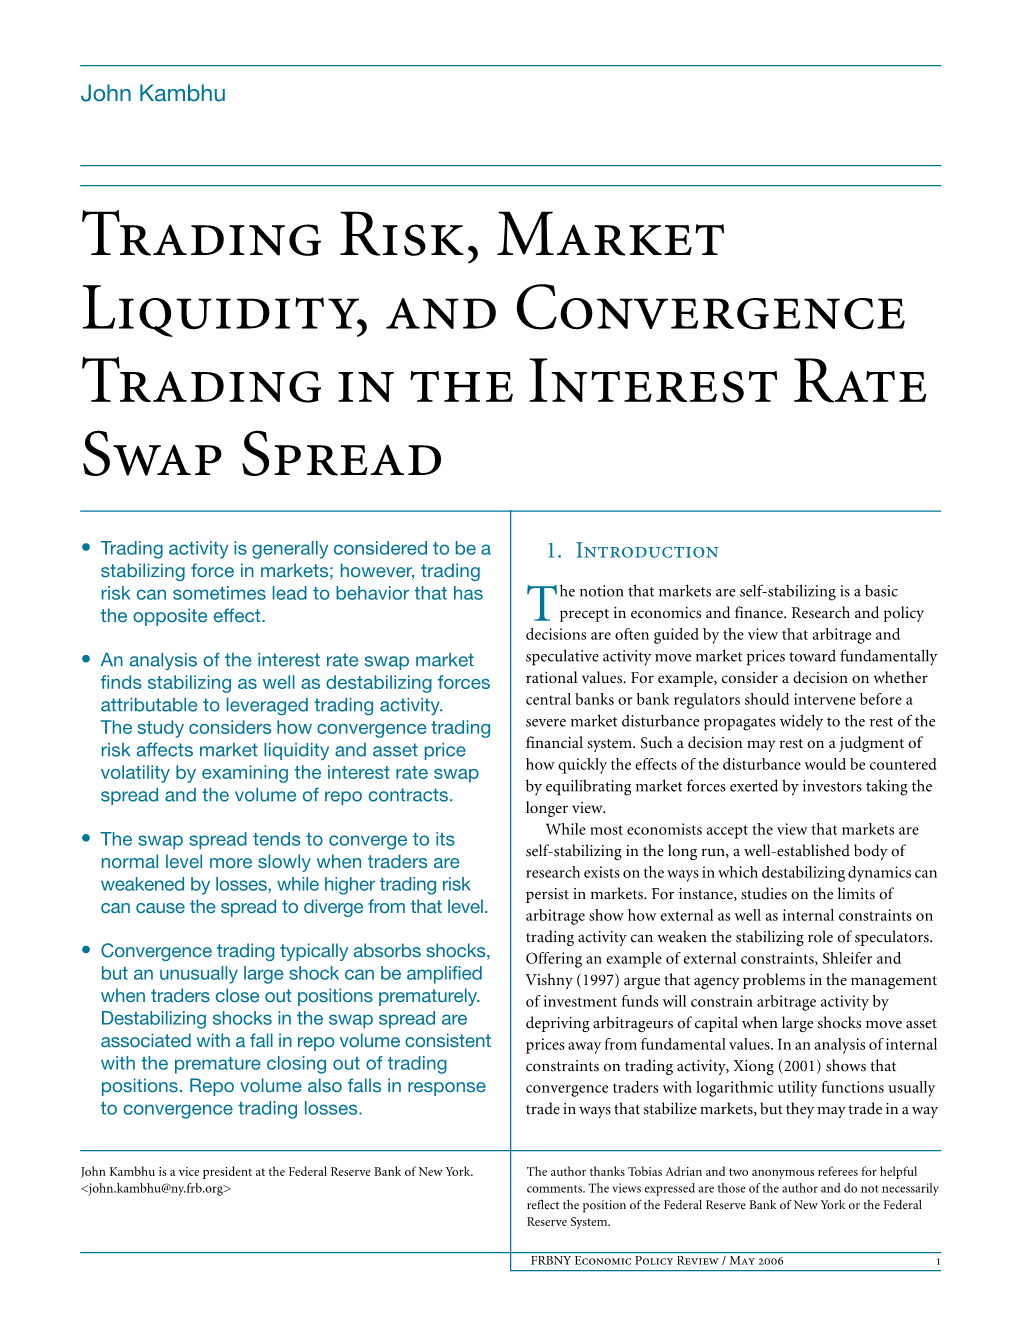 Trading Risk, Market Liquidity, and Convergence Trading in the Interest Rate Swap Spread